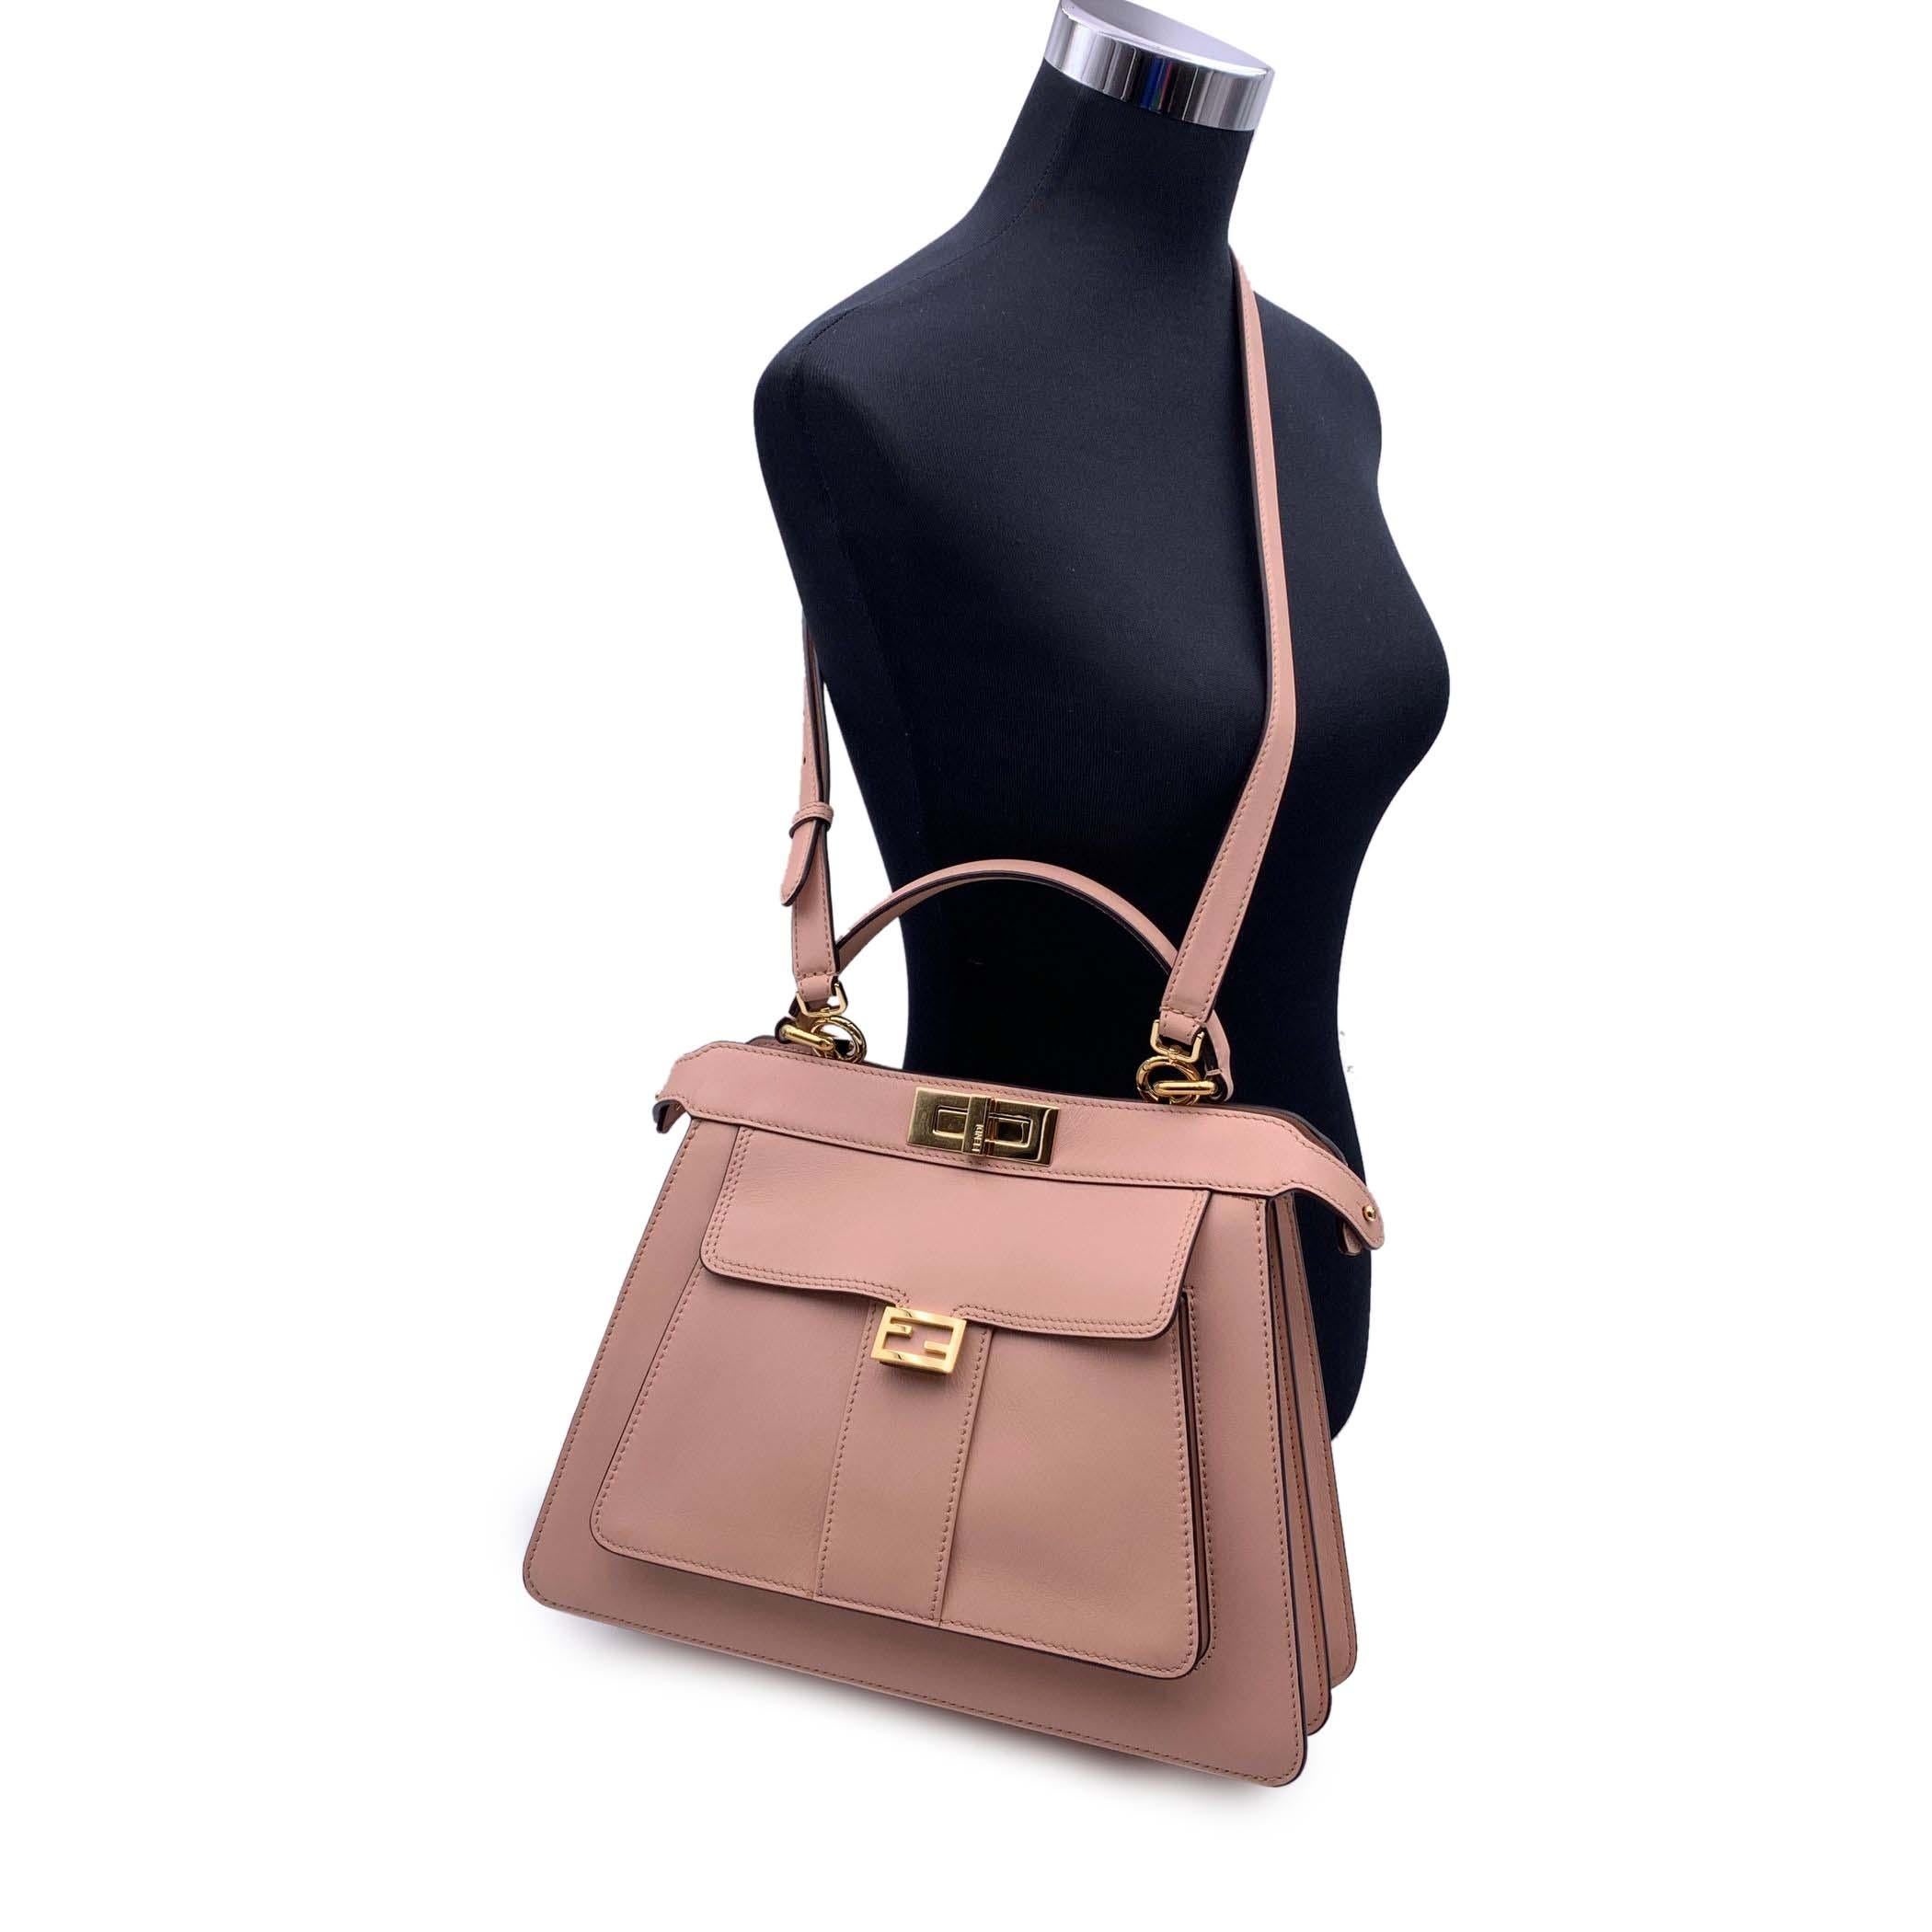 This beautiful Bag will come with a Certificate of Authenticity provided by Entrupy. The certificate will be provided at no further cost. Beautiful Fendi Selleria 'Peekaboo ISeeU' Bag in baby pink leather. The bag features 2 compartments divided by